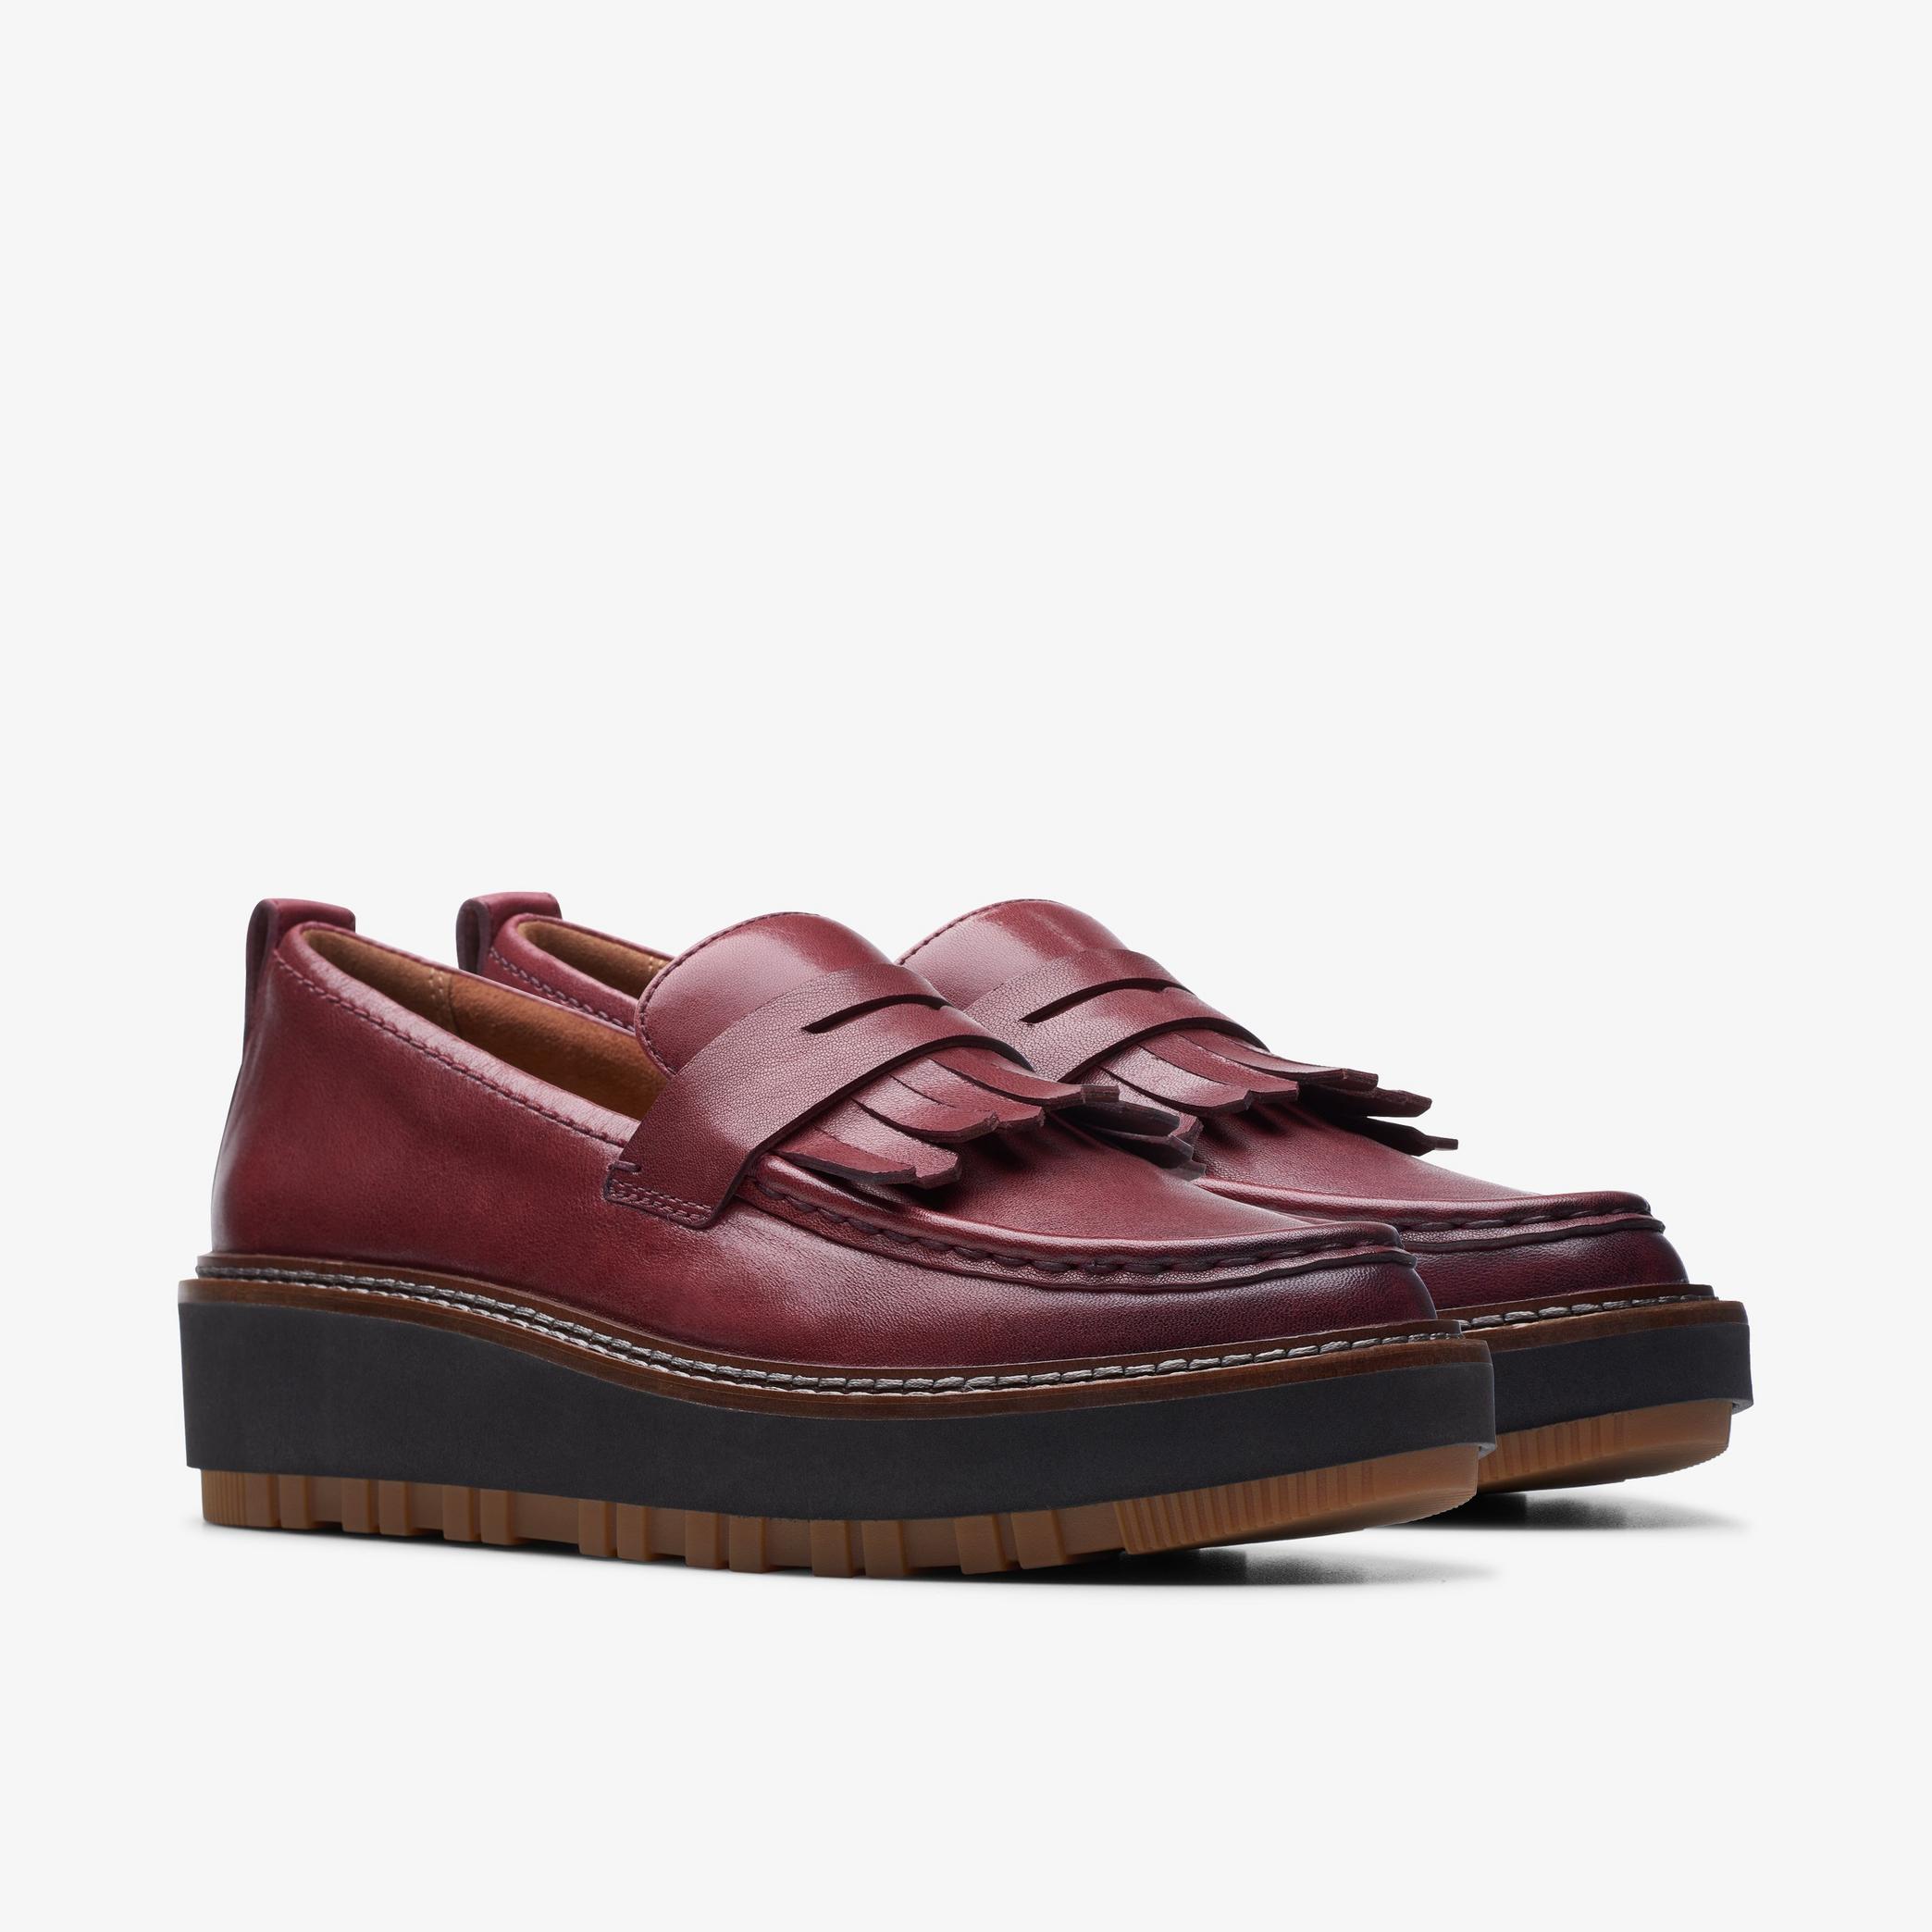 Orianna Loafer Burgundy Leather Loafers, view 5 of 7